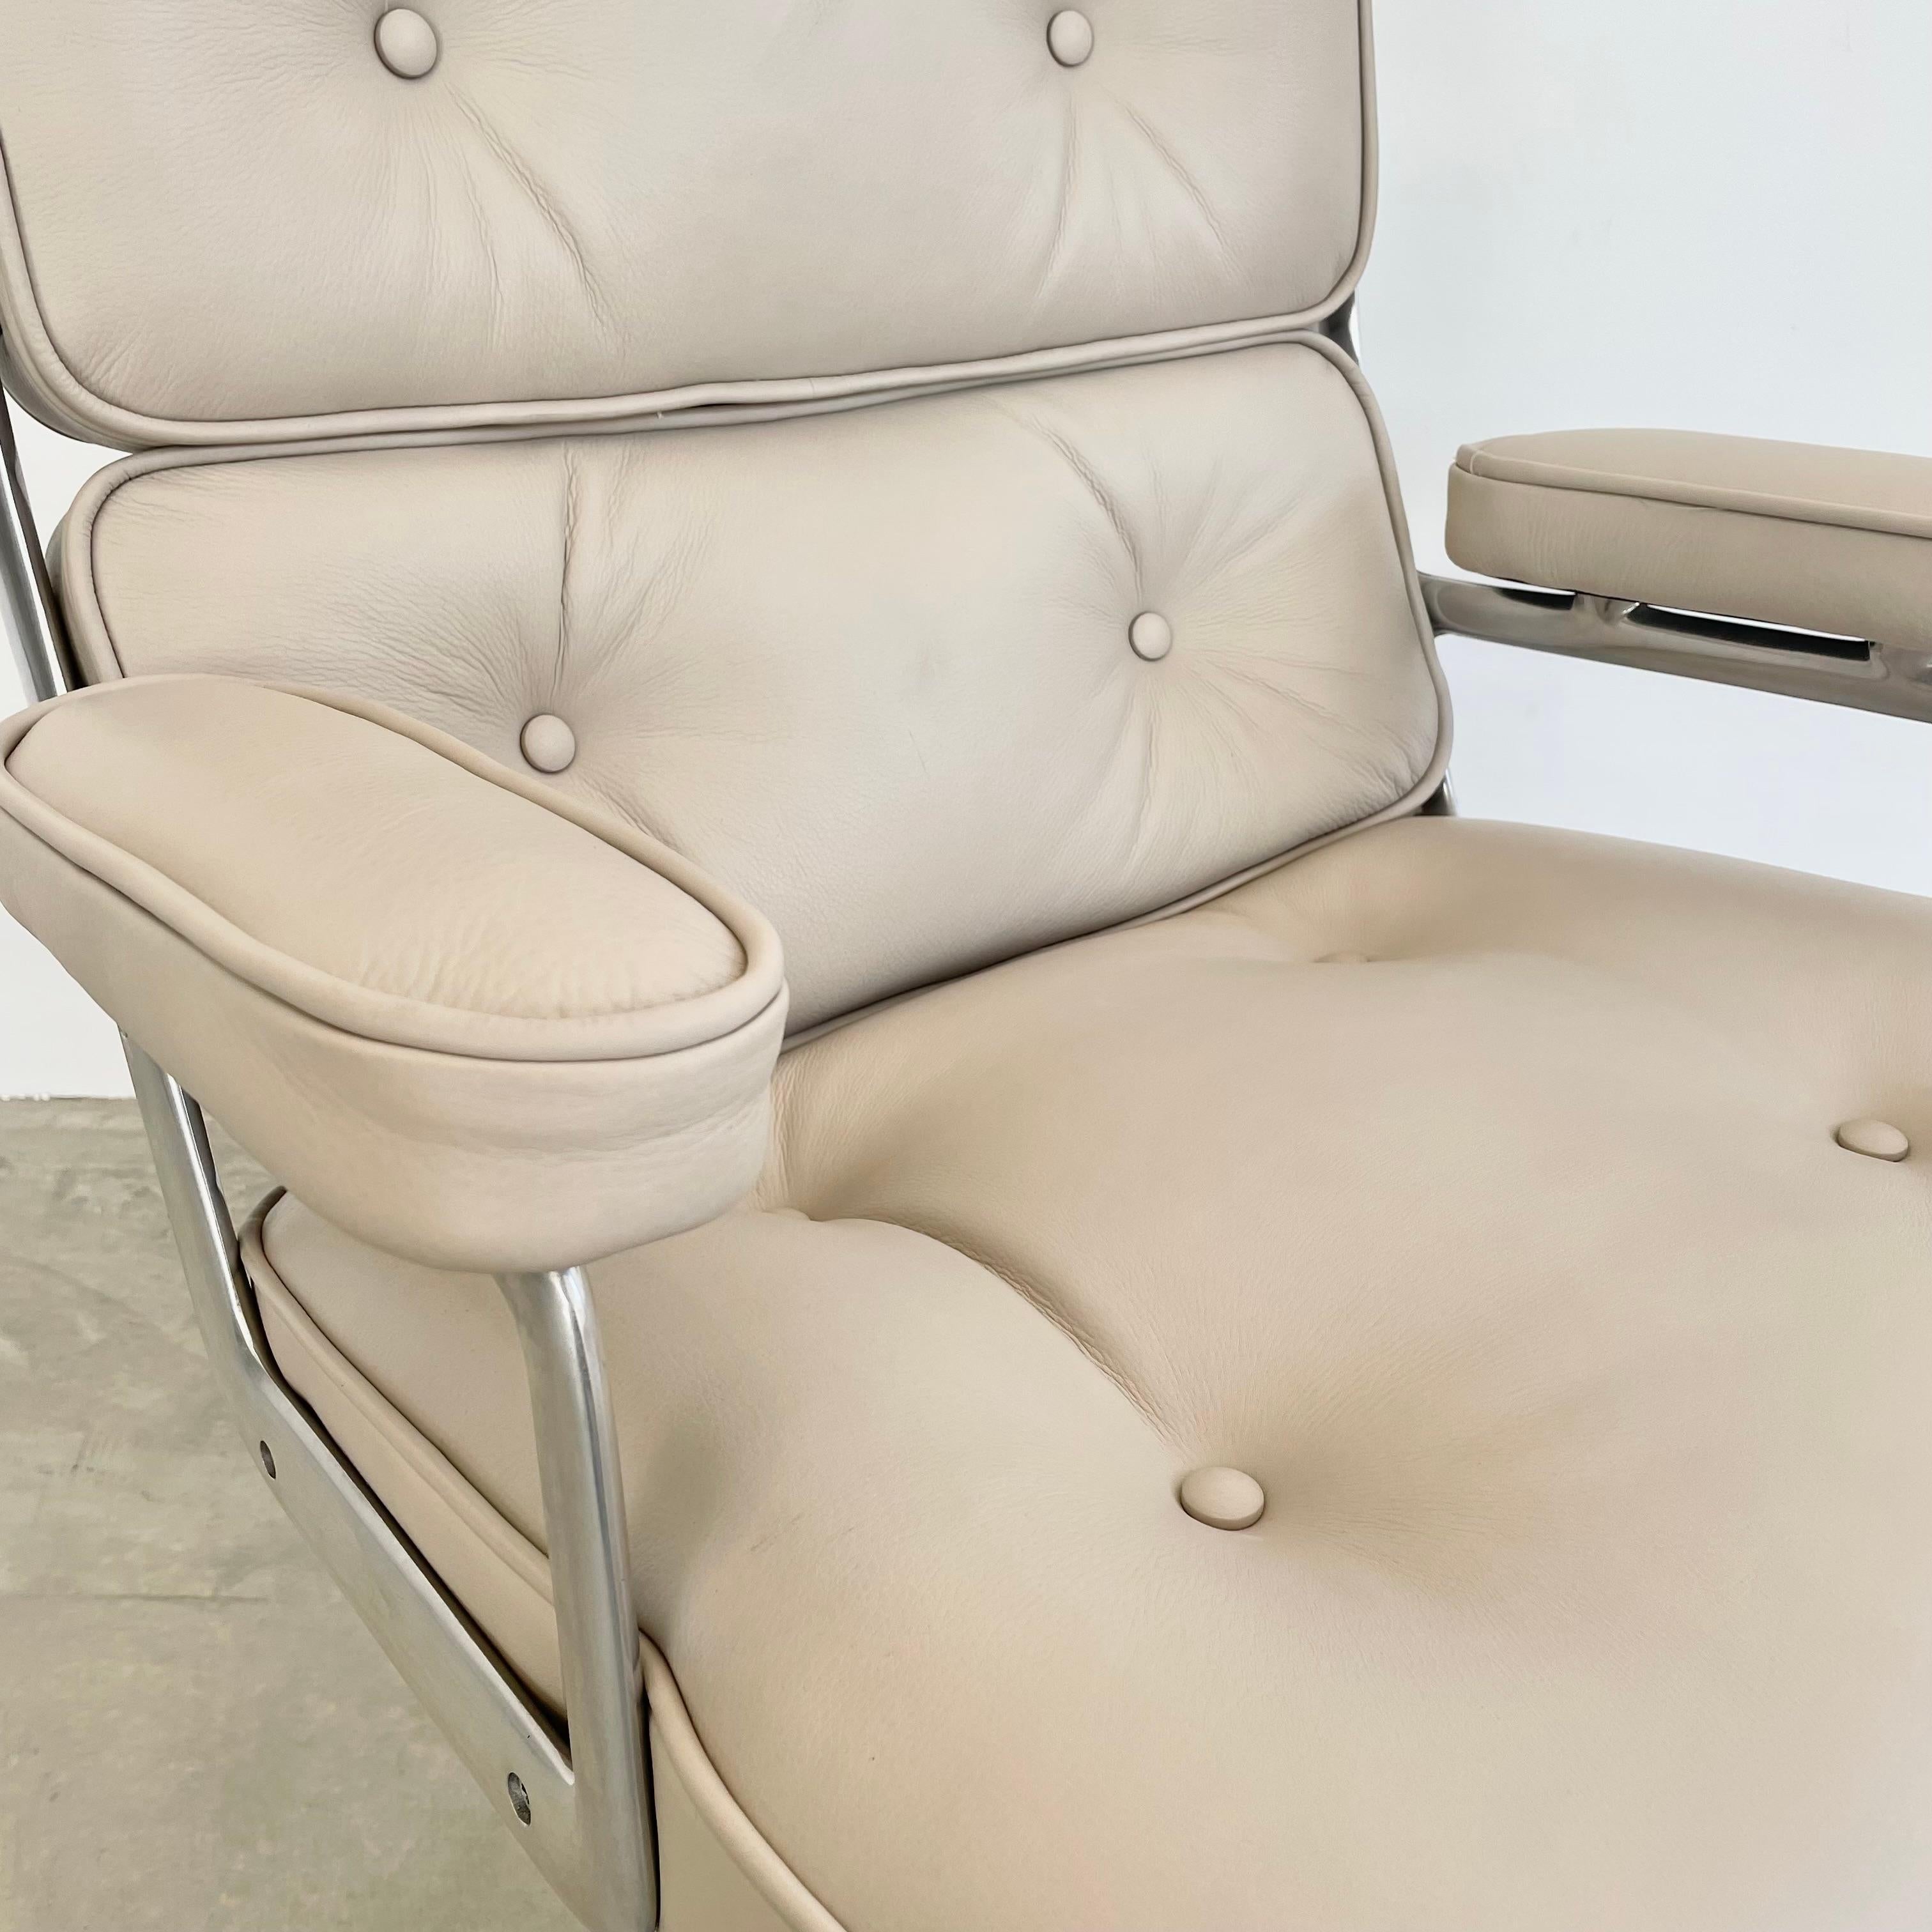 Eames Time Life Chair in Grey Leather for Herman Miller, 1980s For Sale 4